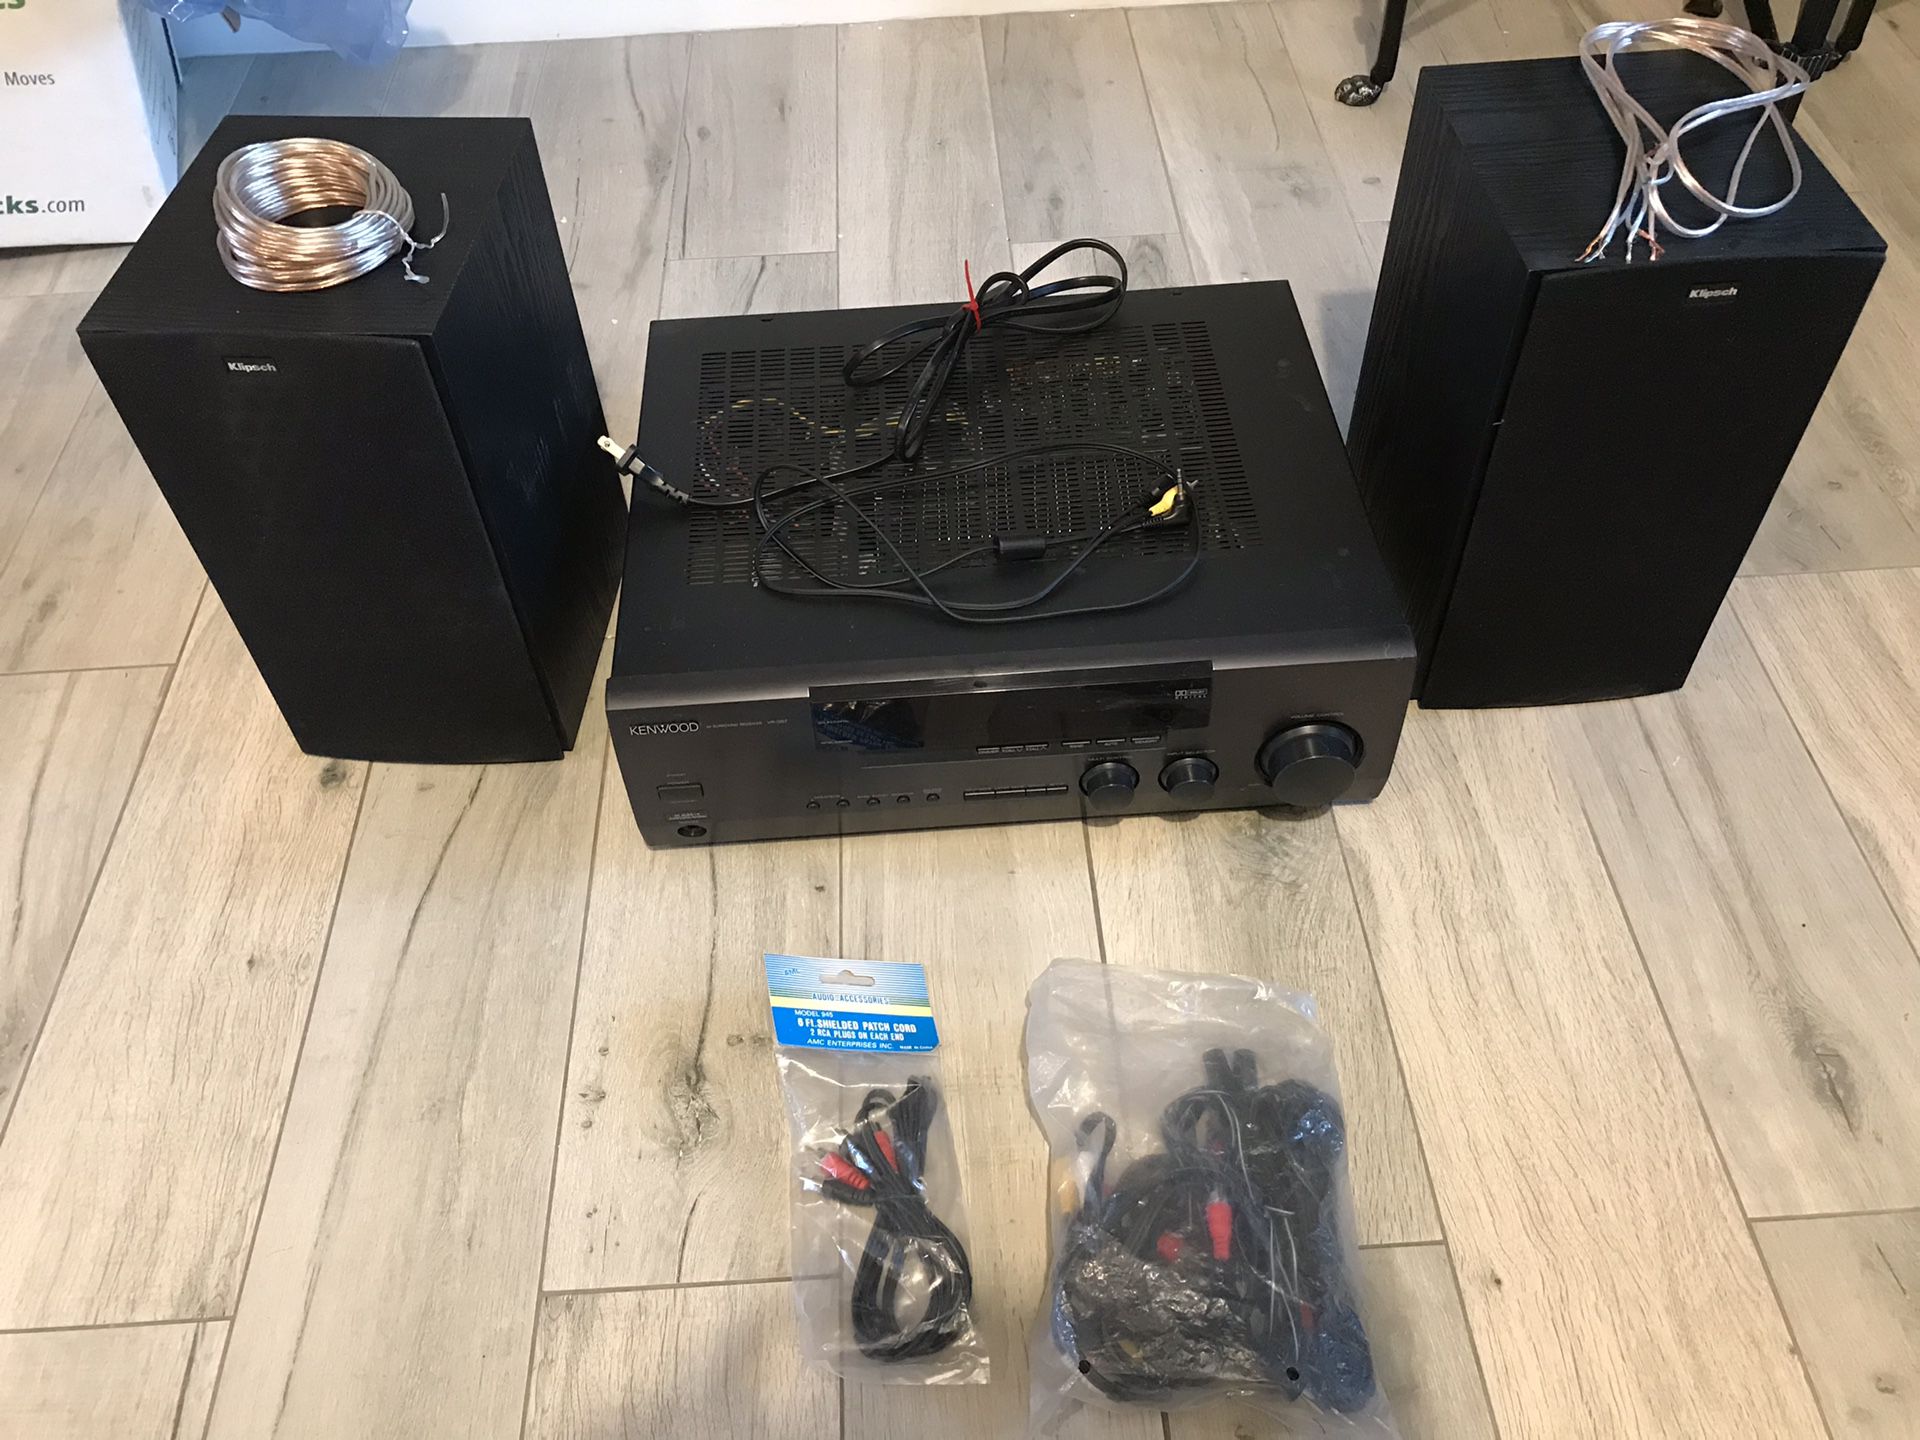 Kenwood VR-357 Stereo Receiver and 2x Klipsch Icon KB-15 speakers, and all necessary wiring